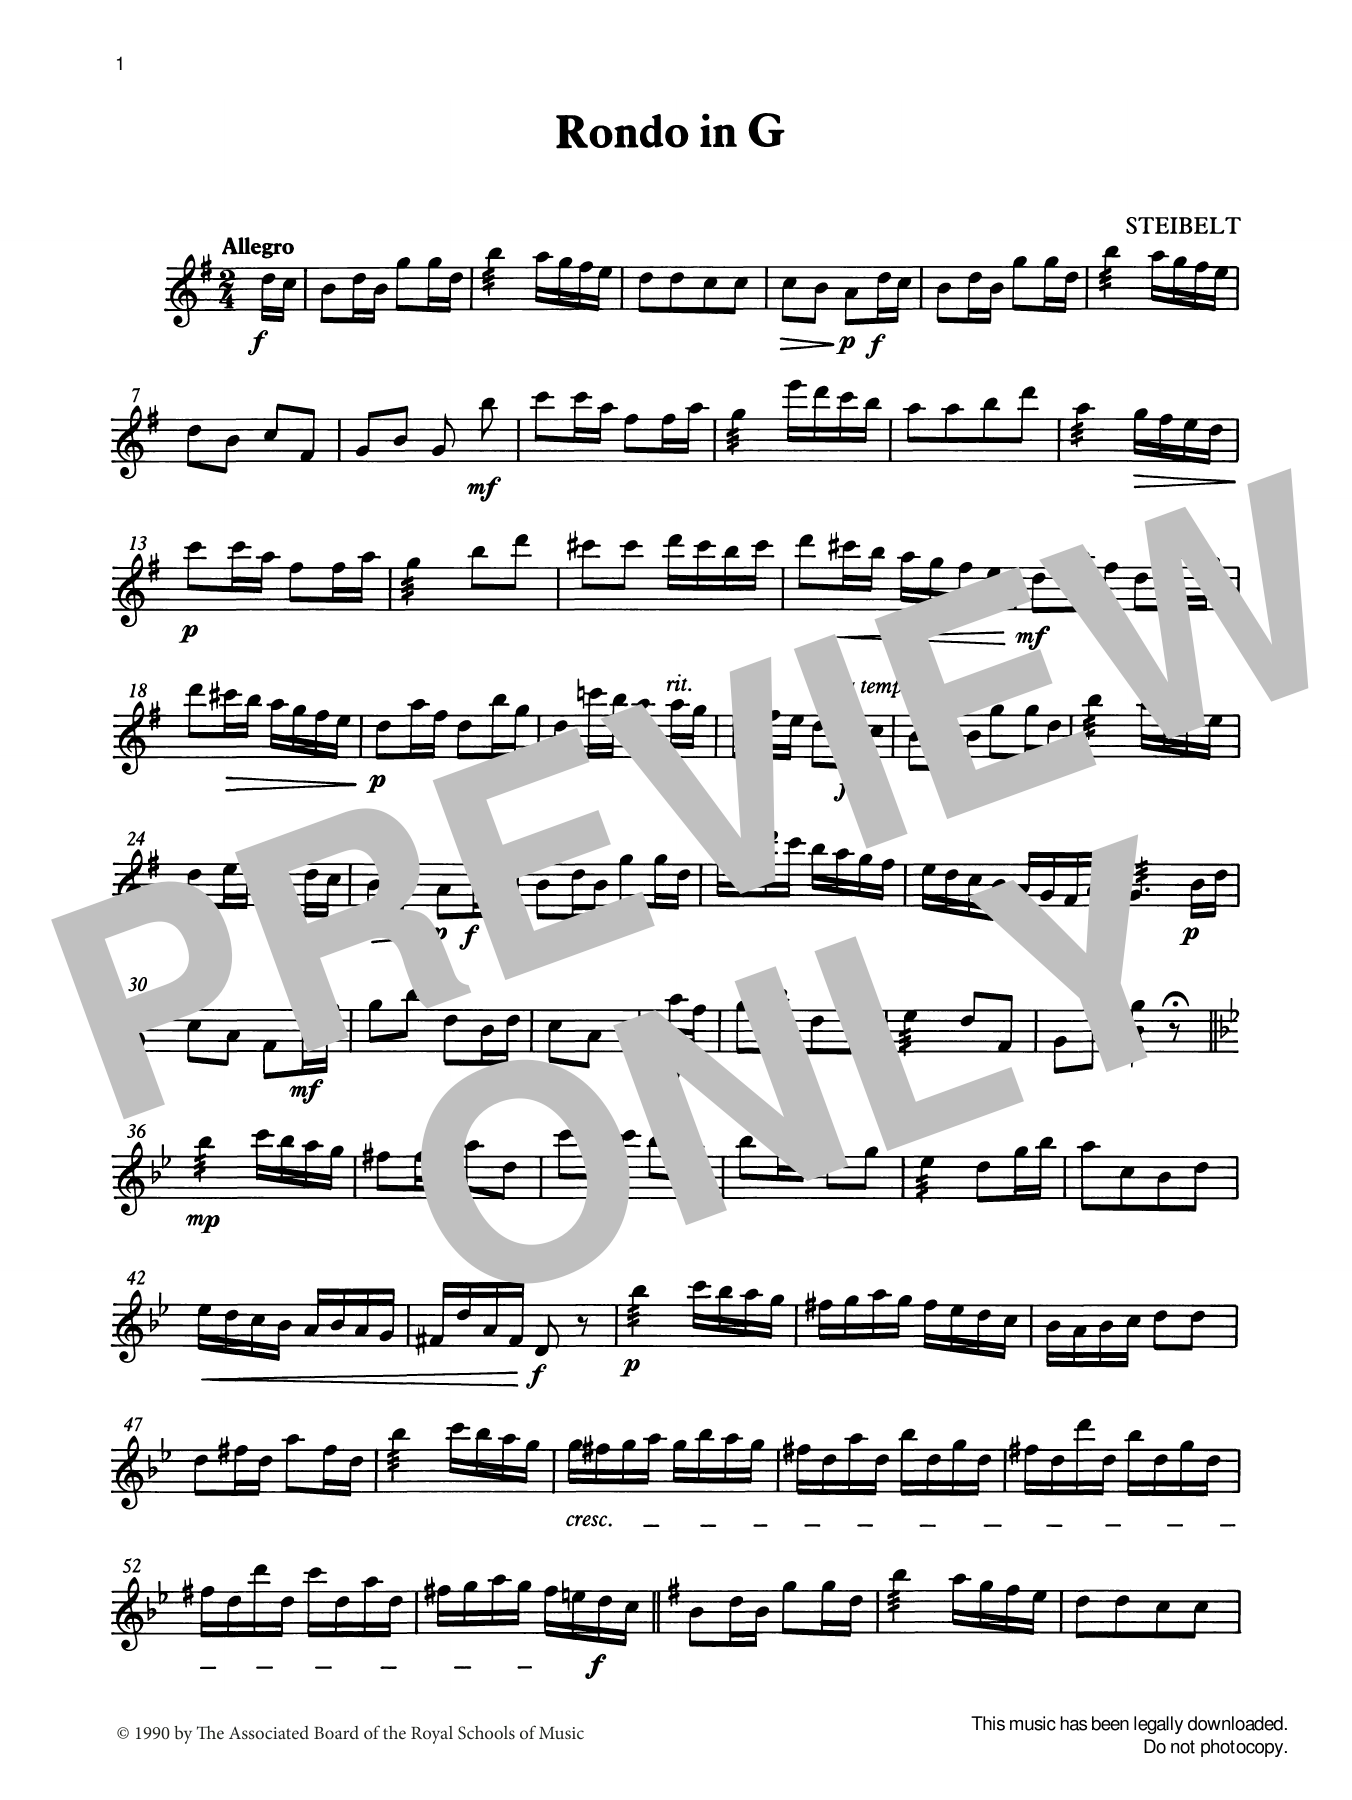 Download Daniel Steibelt Rondo in G from Graded Music for Tuned Sheet Music